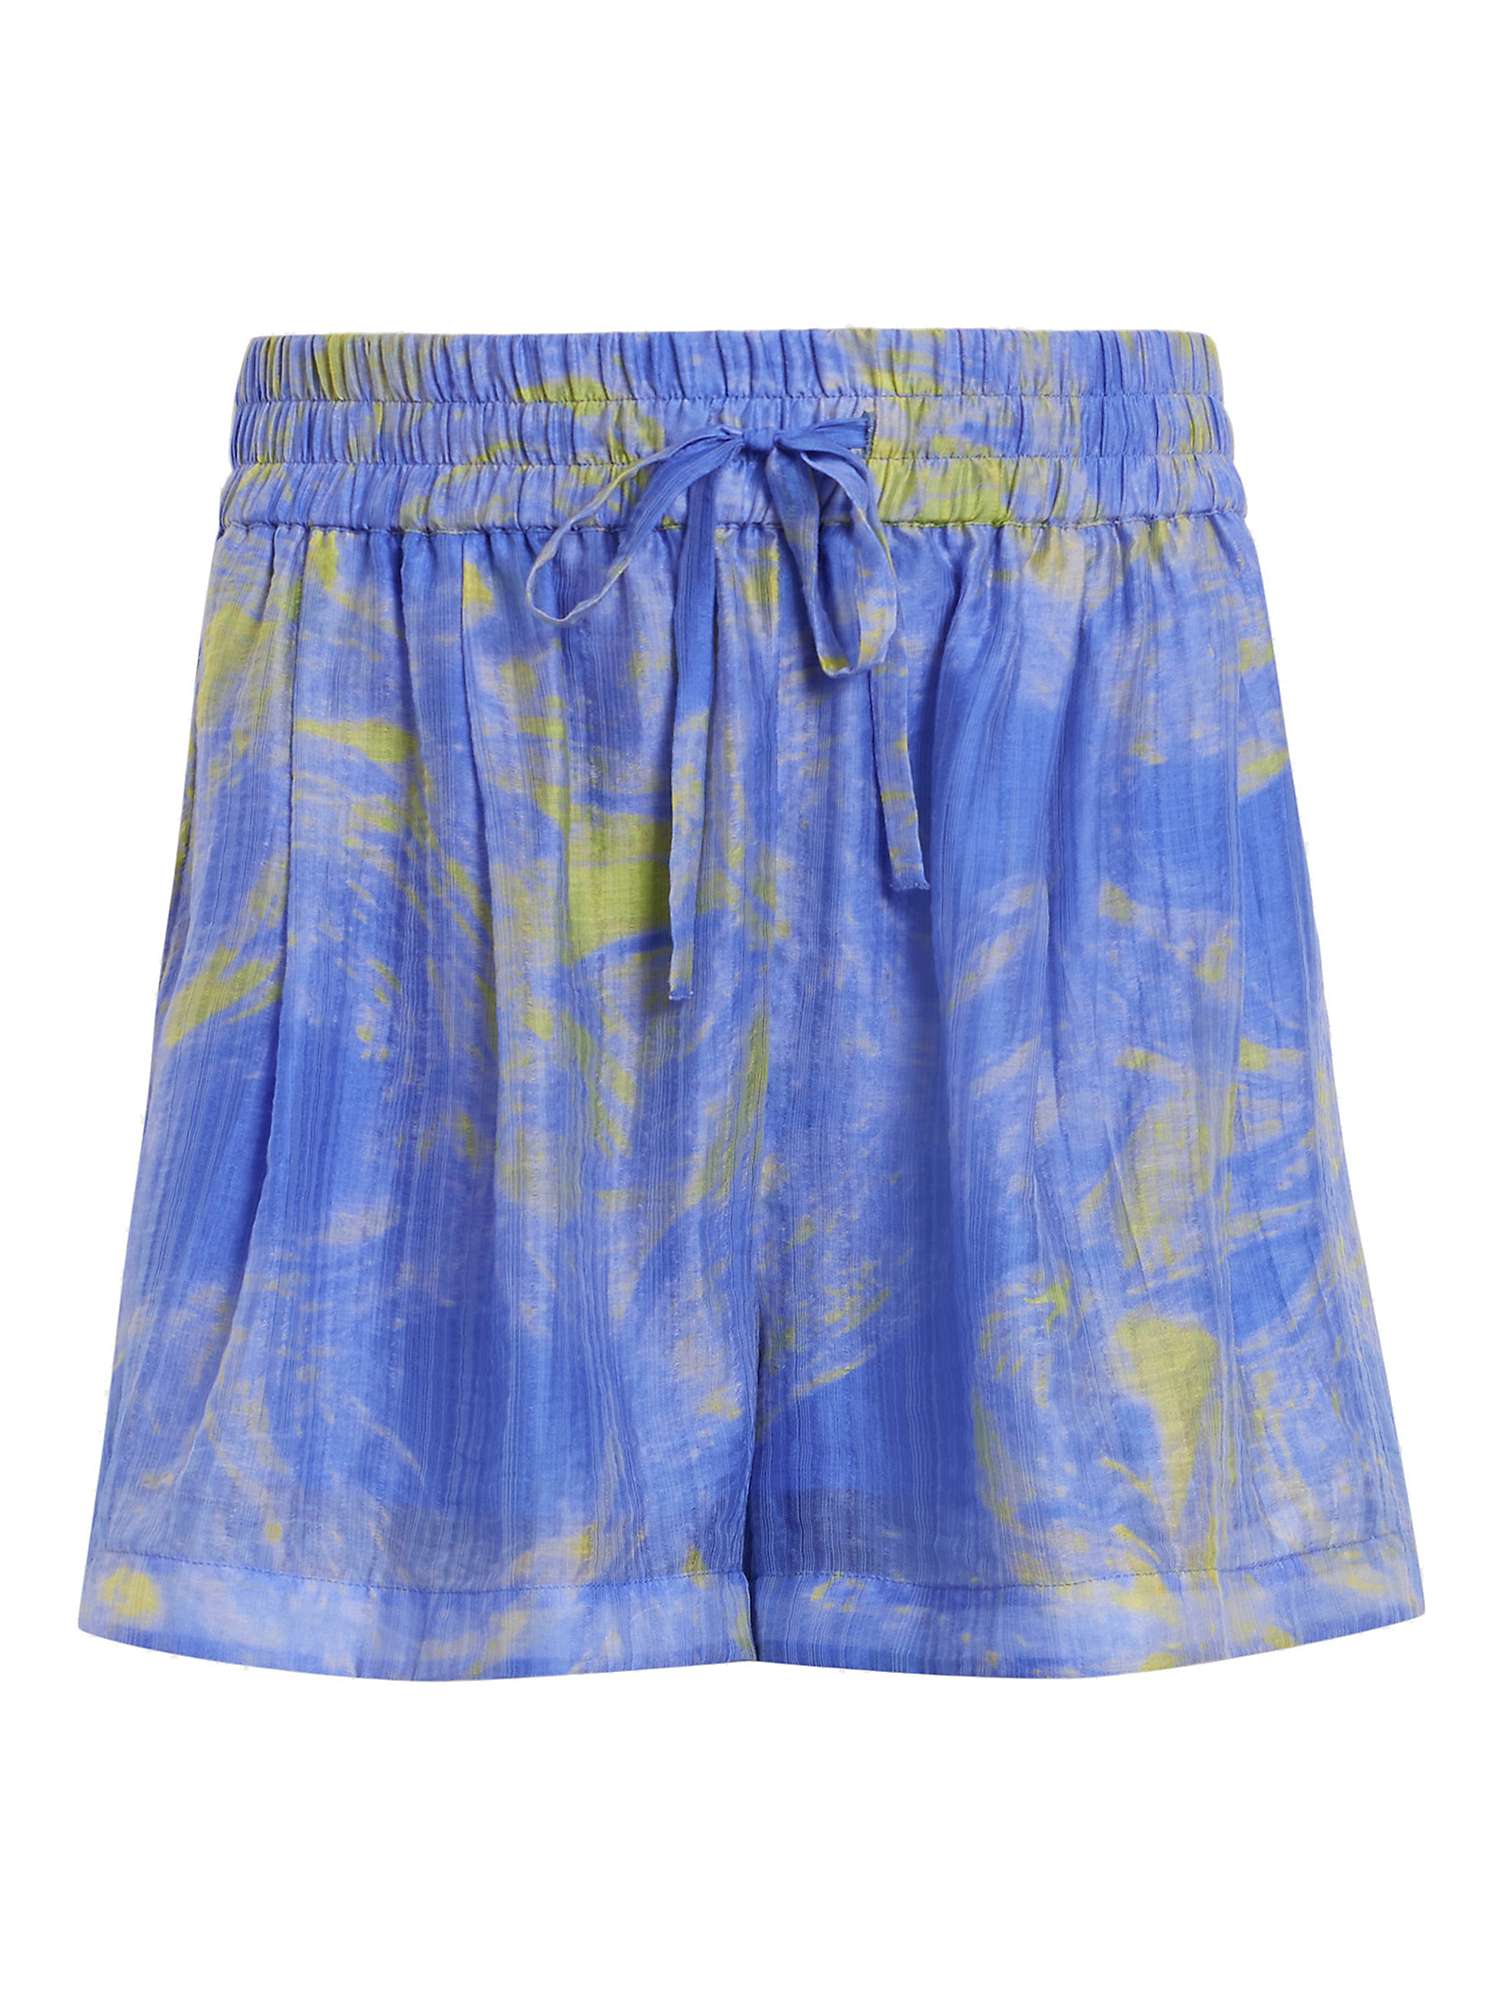 Buy AllSaints Isla Abstract Print Drawstring Shorts, Electric Blue/Multi Online at johnlewis.com